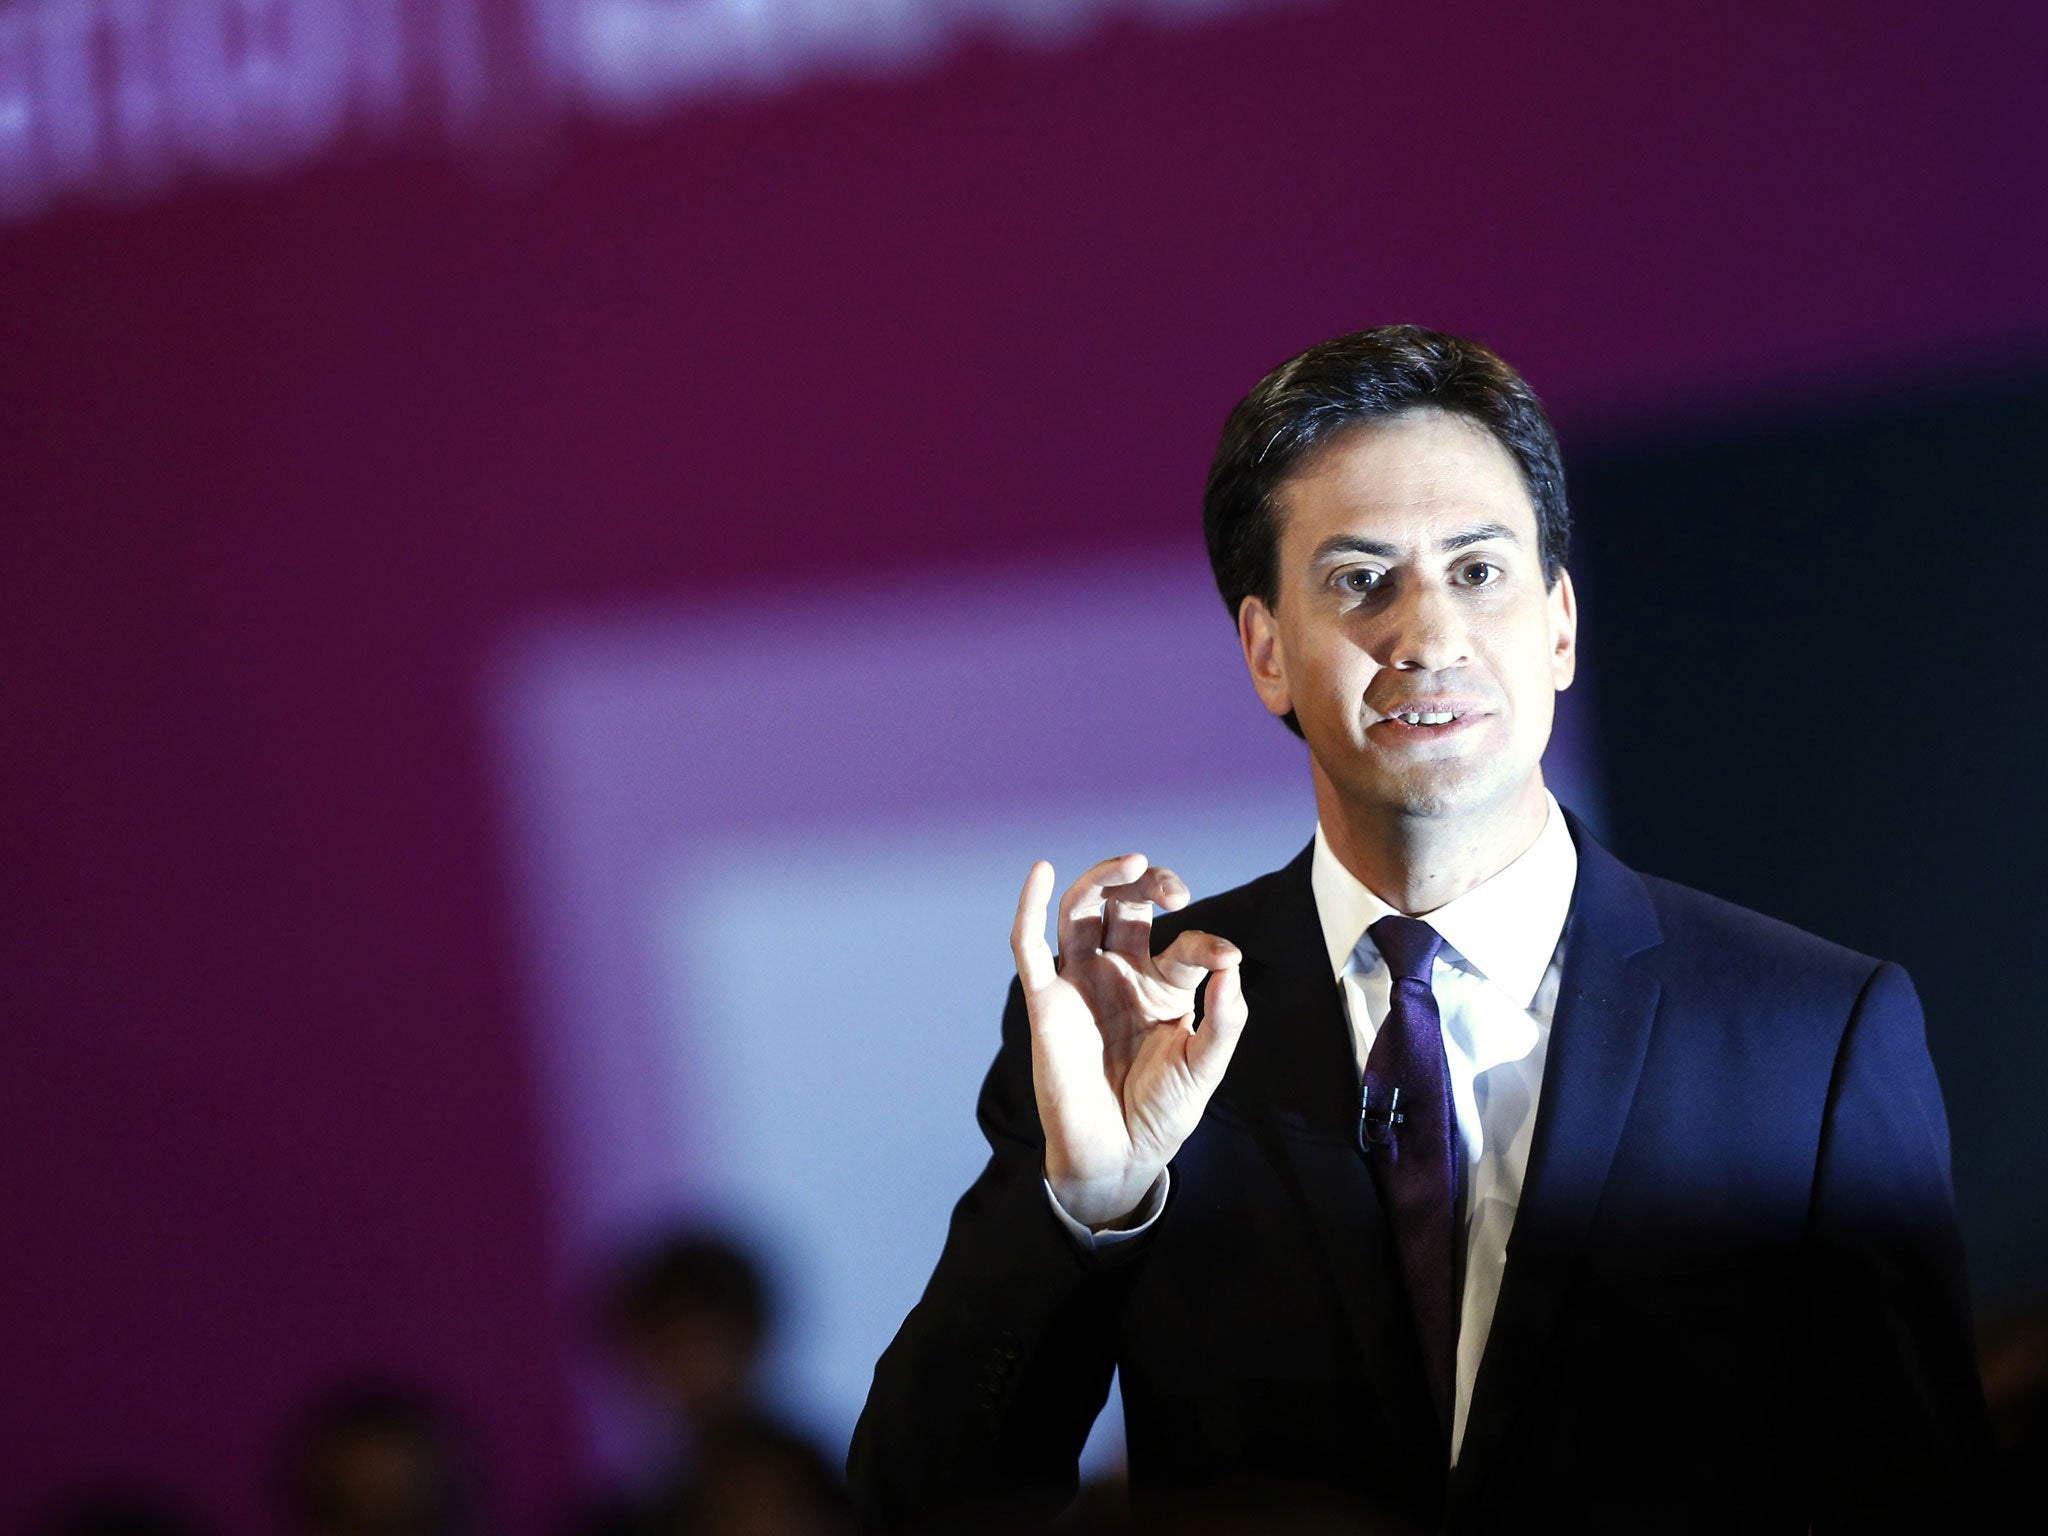 Ed Miliband will unveil Labour's new green paper in Manchester, with the focus on lowering energy bills